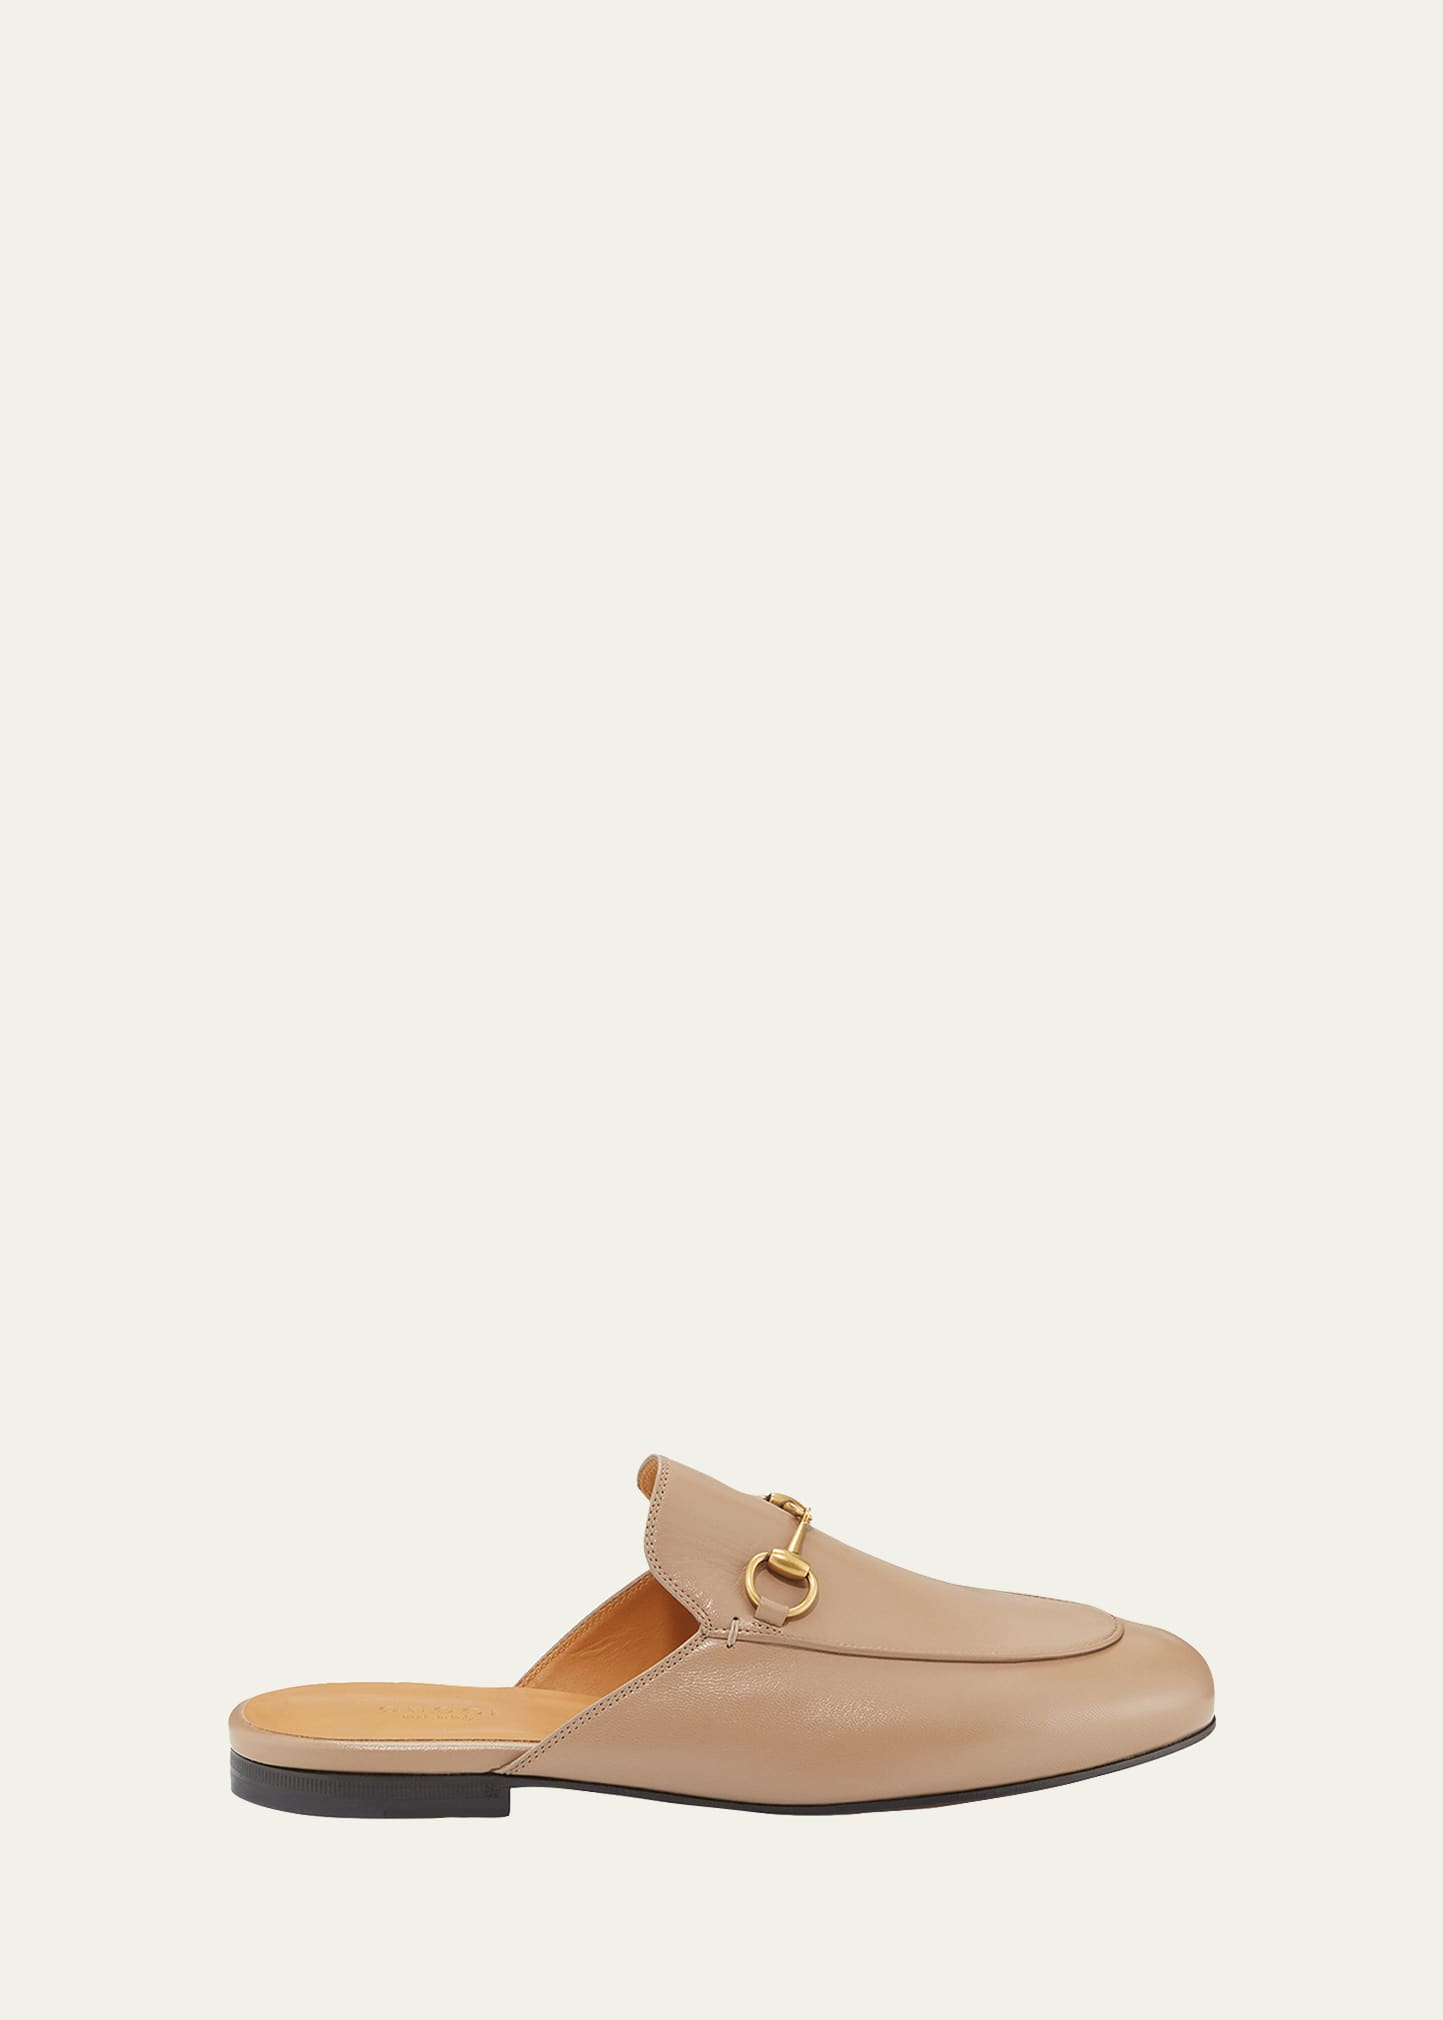 Gucci Princetown Leather Mules In Beige